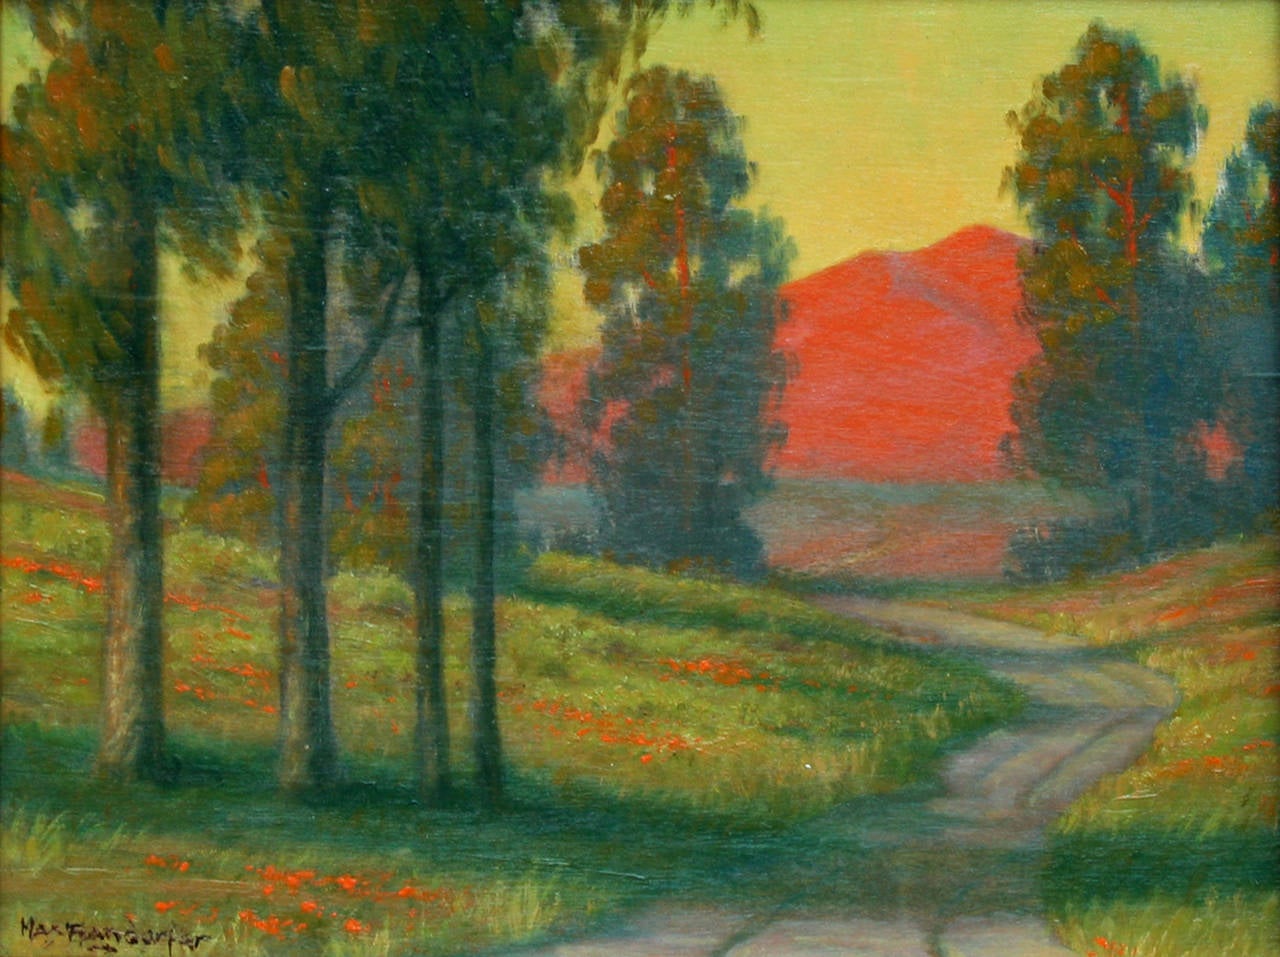 California Country - Painting by Max Flandorfer